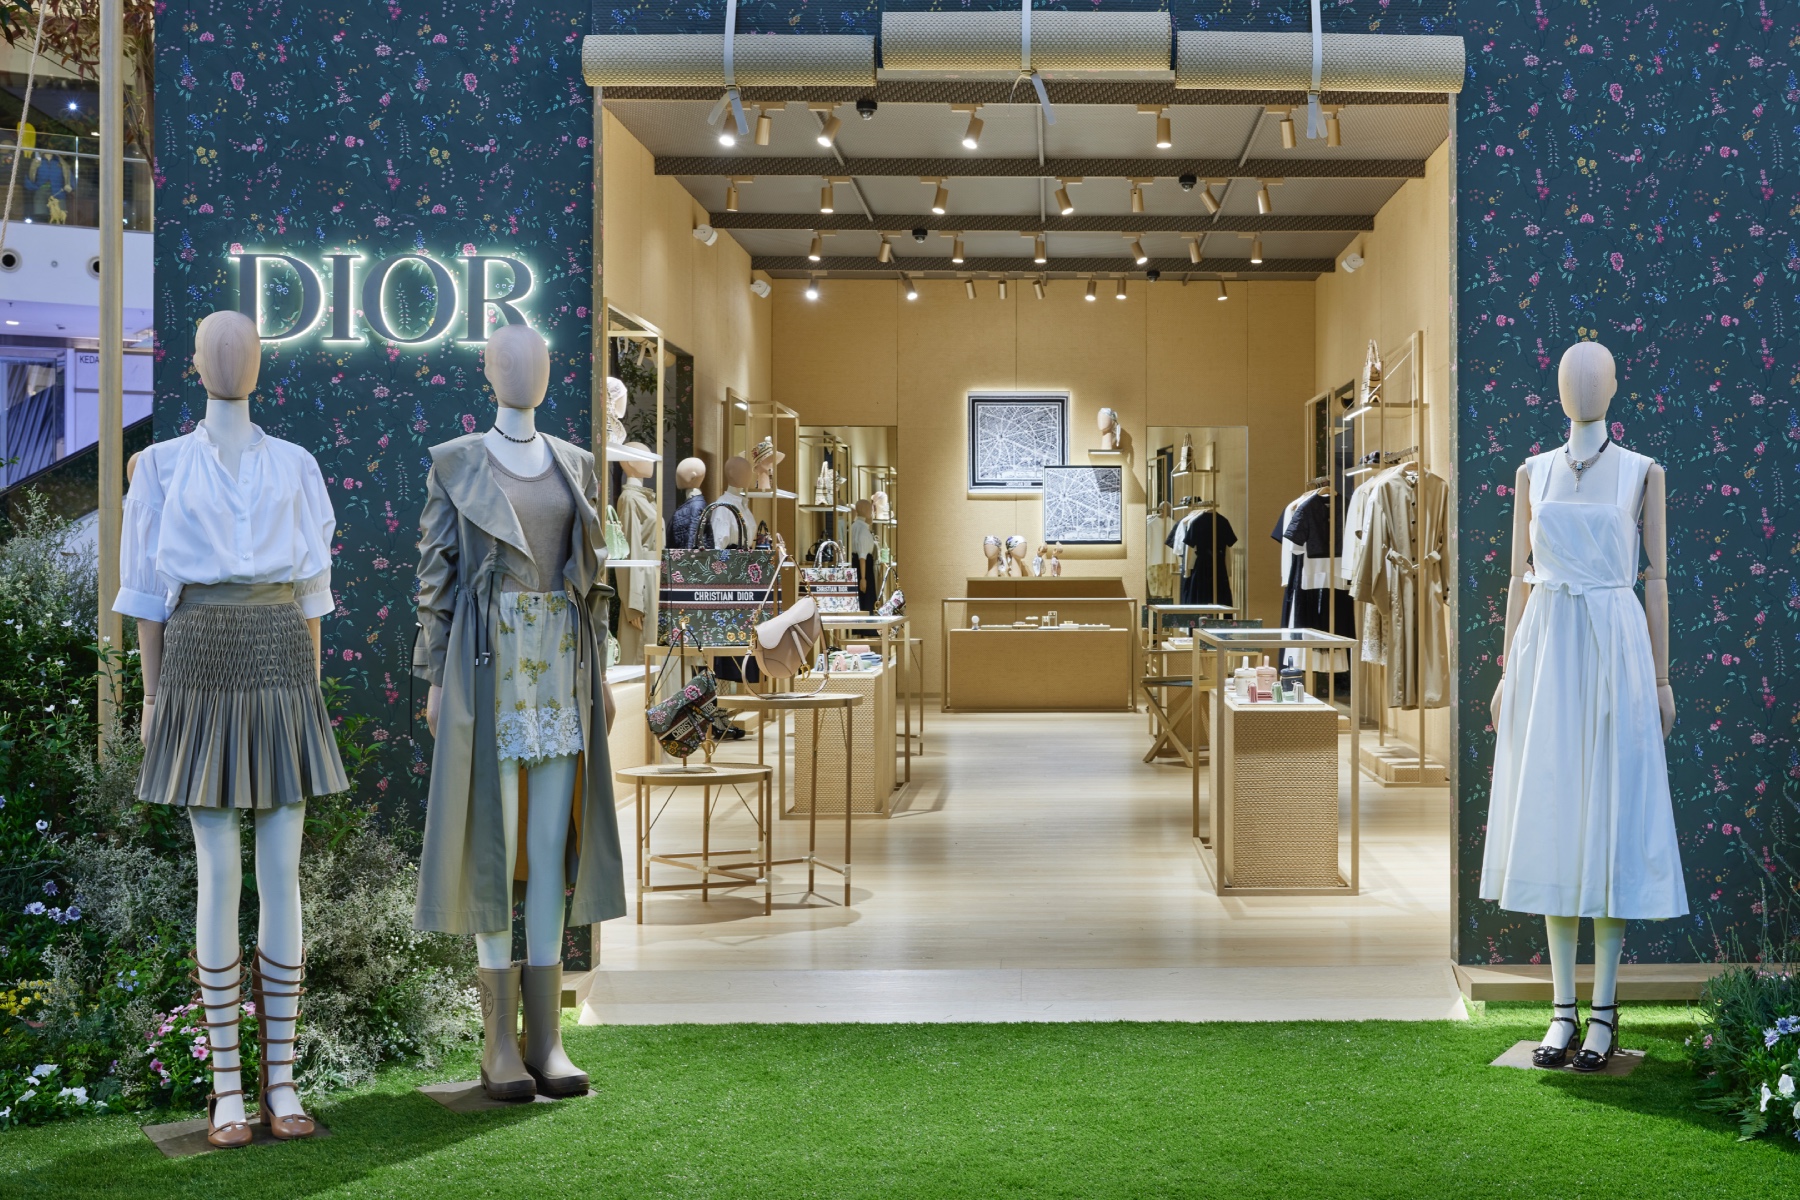 Dior unveils its Christmas decorations around the world  News and Events   News  Défilés  DIOR